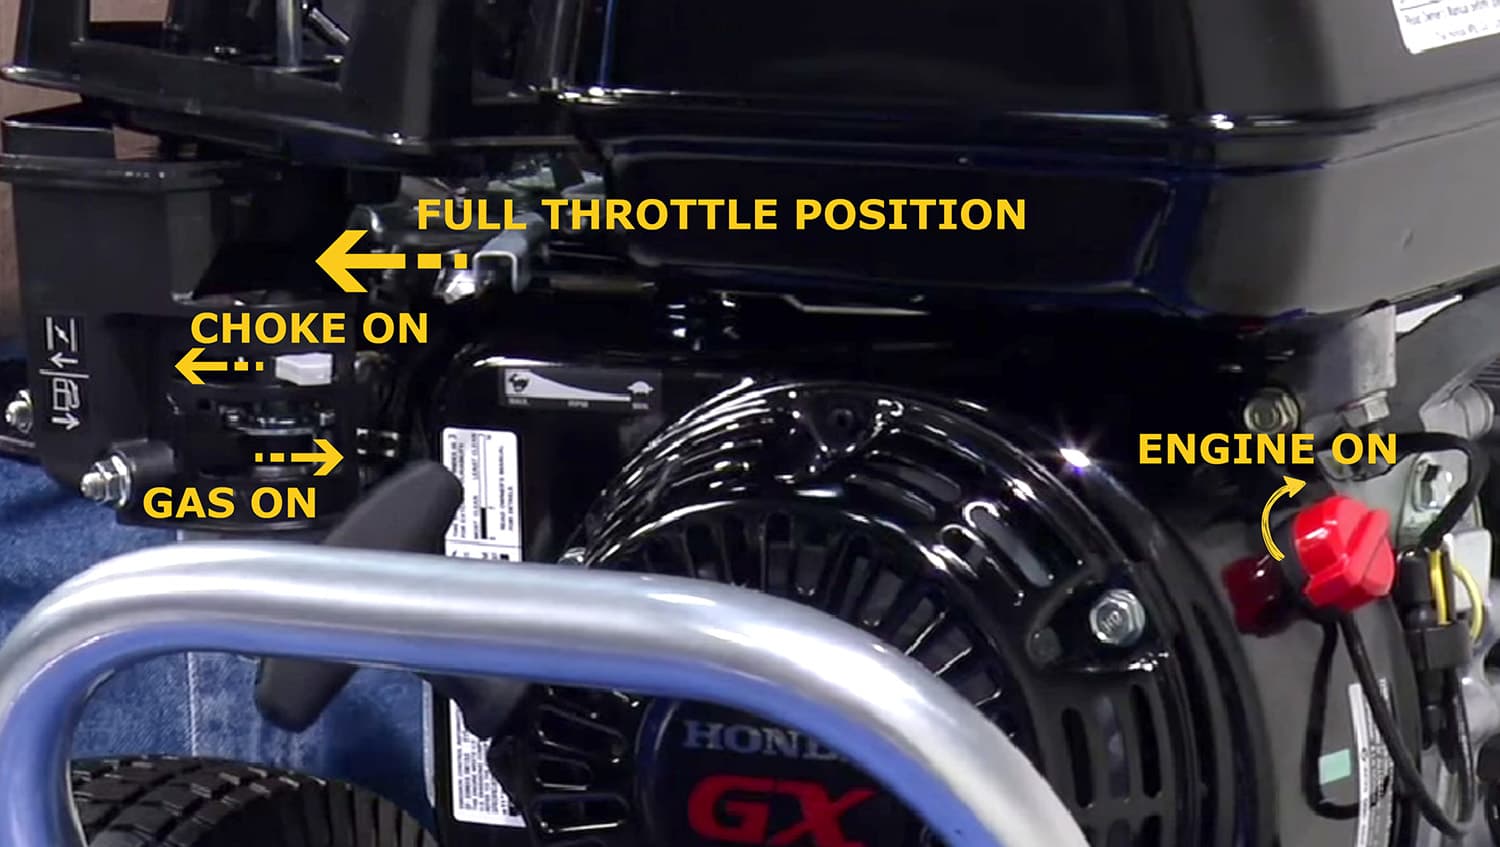 Turn gas lever and on/off switch to ON position